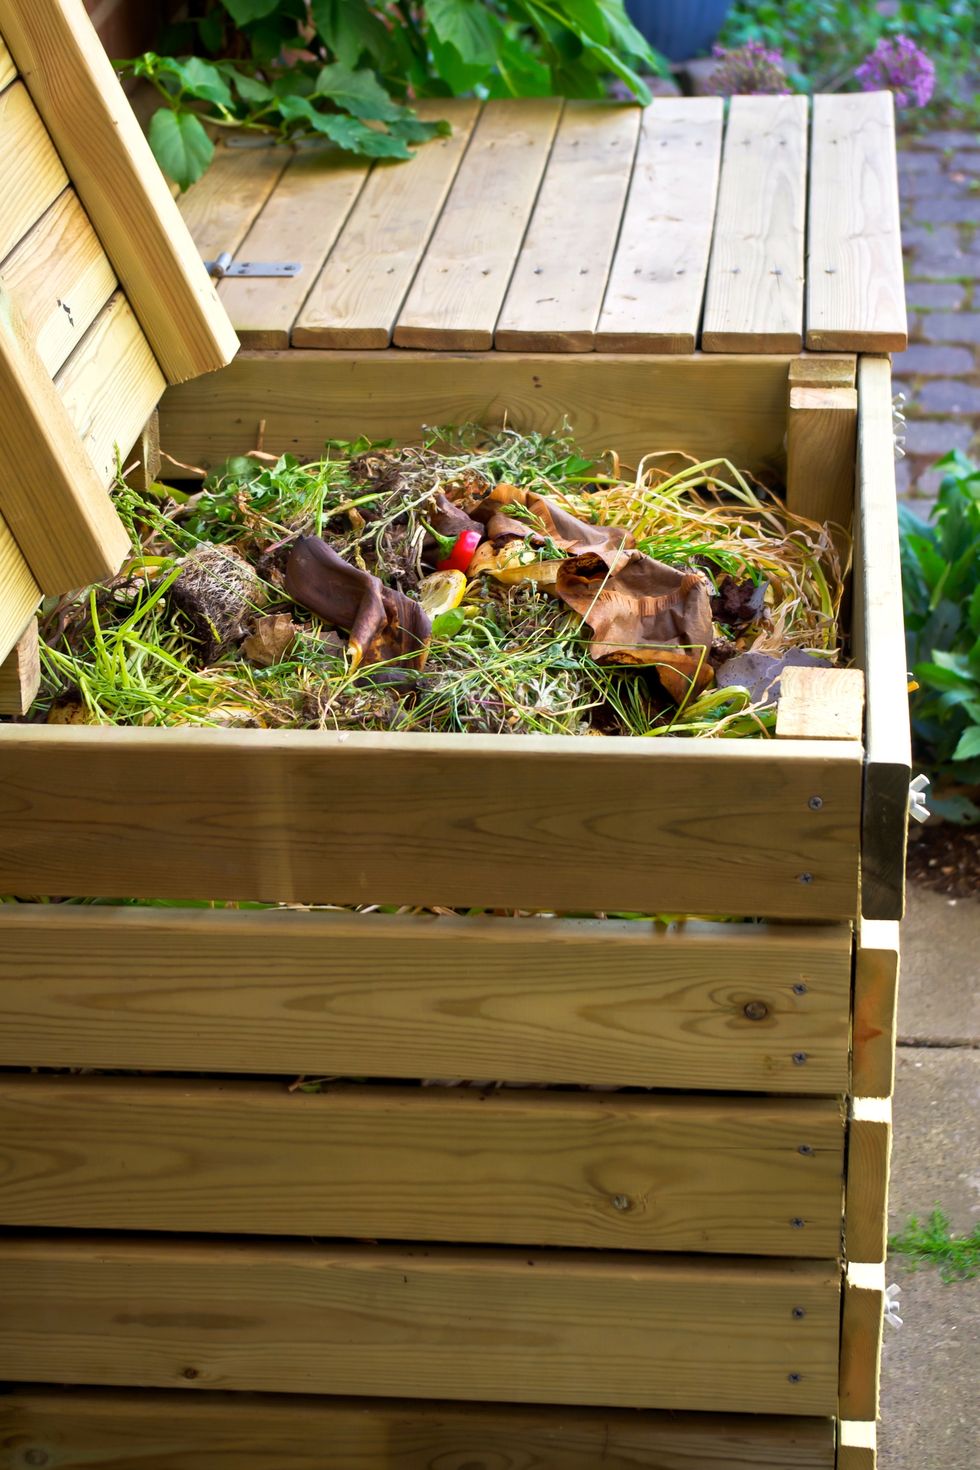 how to make compost compost bins made ​​of wood for vegetable kitchen and garden waste